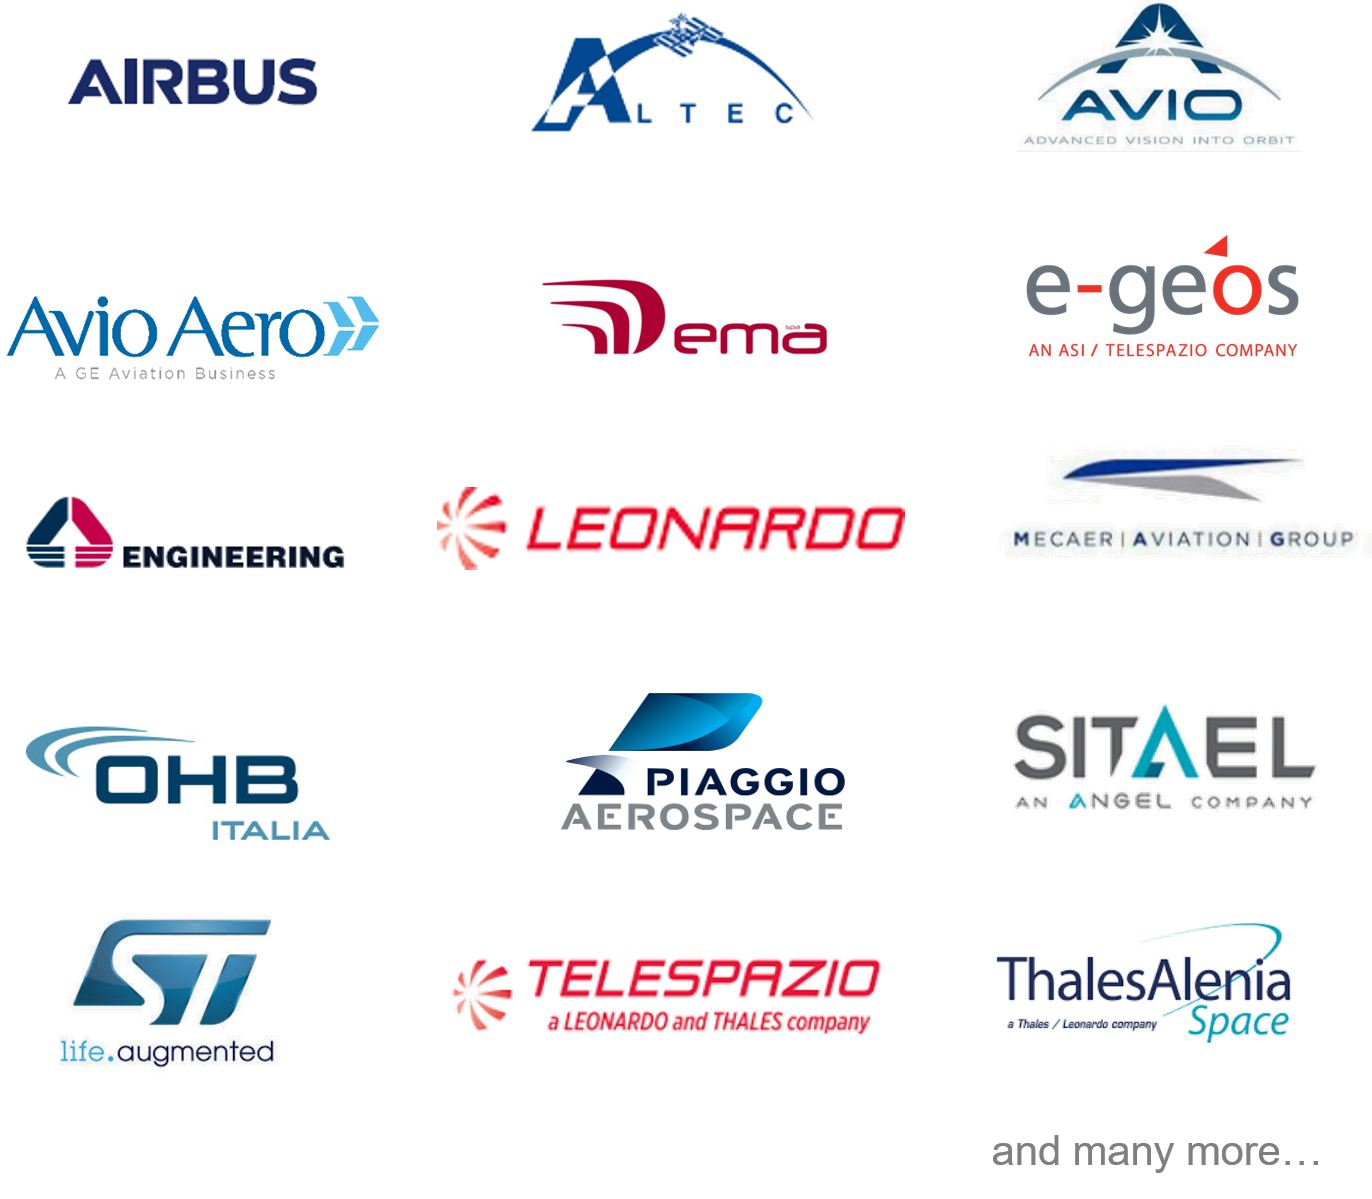 aerospace players in Italy